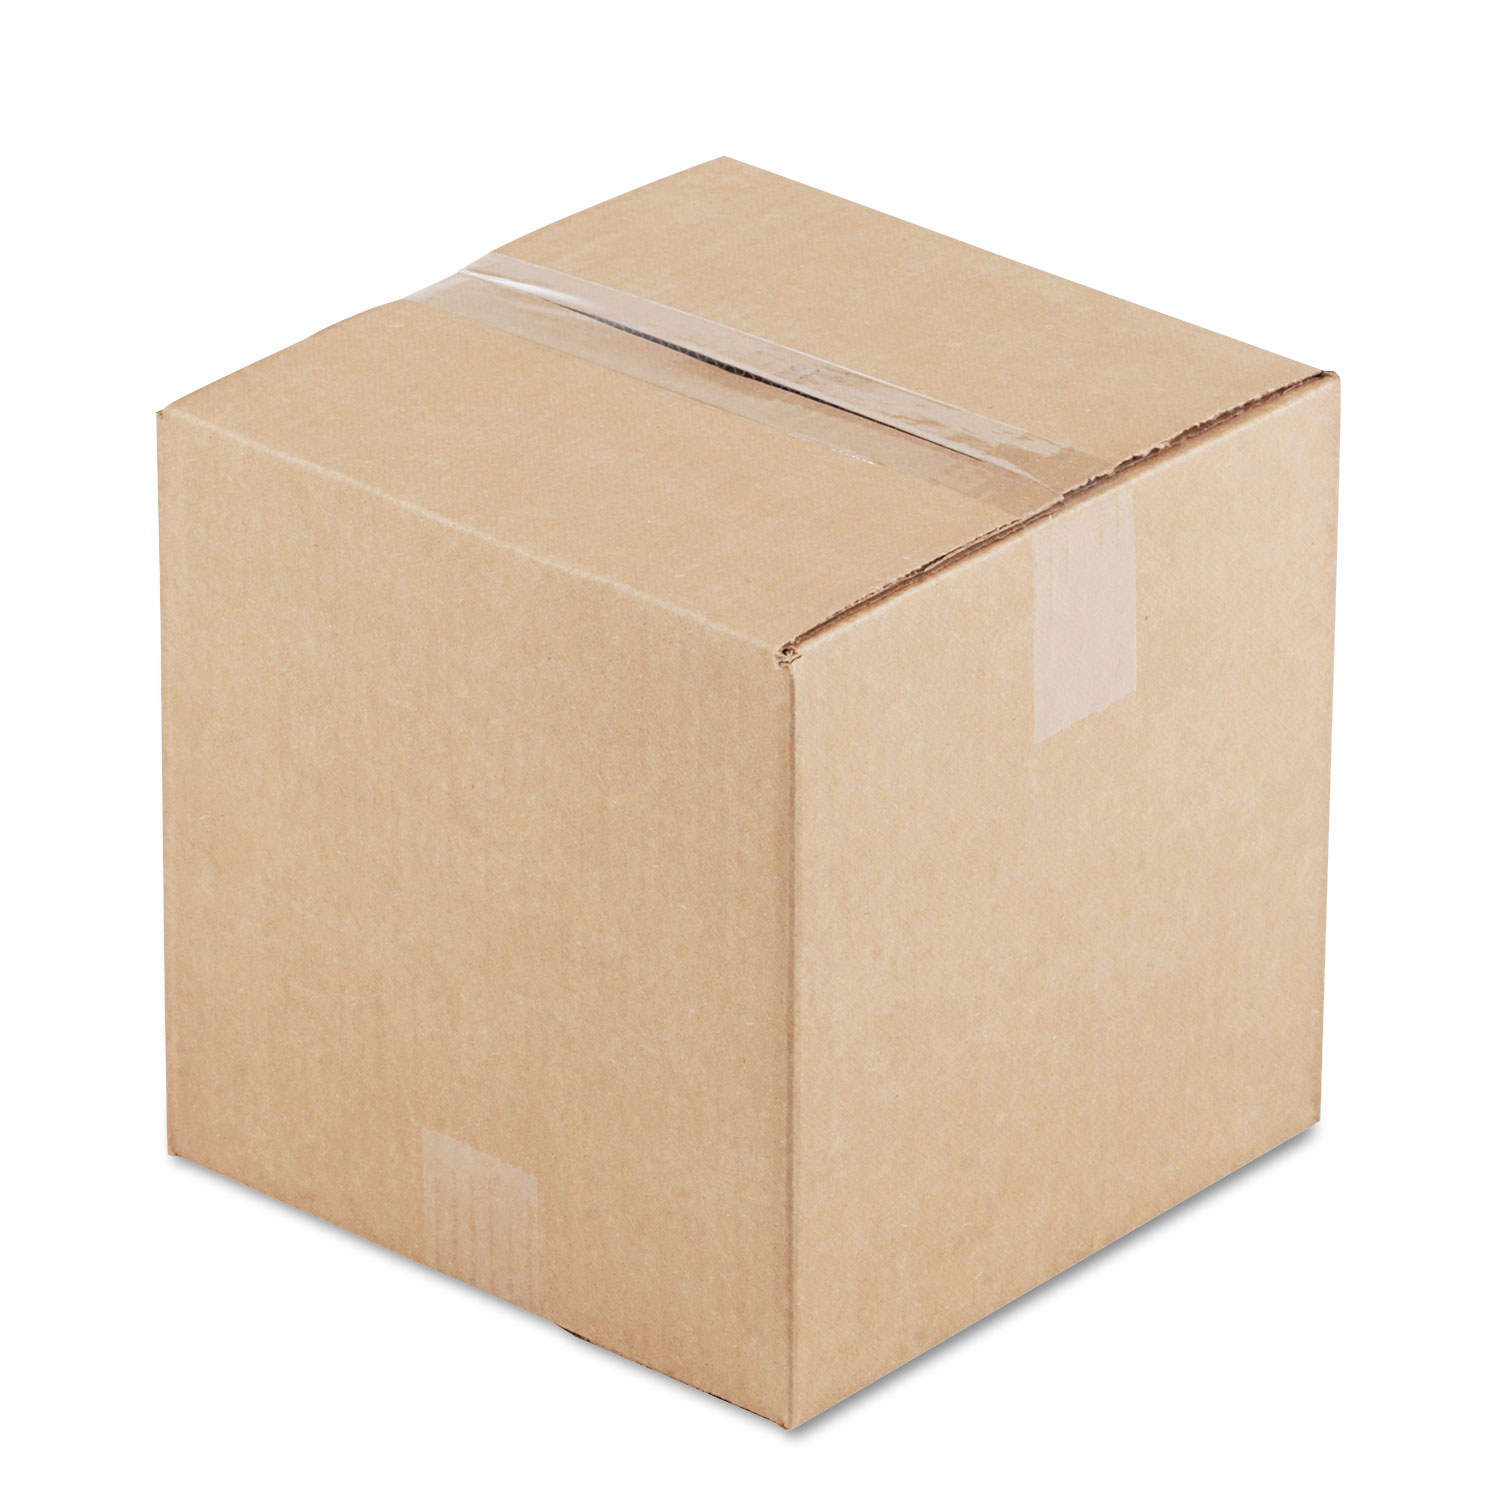 Brown Corrugated - Cubed Fixed-Depth Shipping Boxes, 10l x 10w x 10h, 25/Bundle